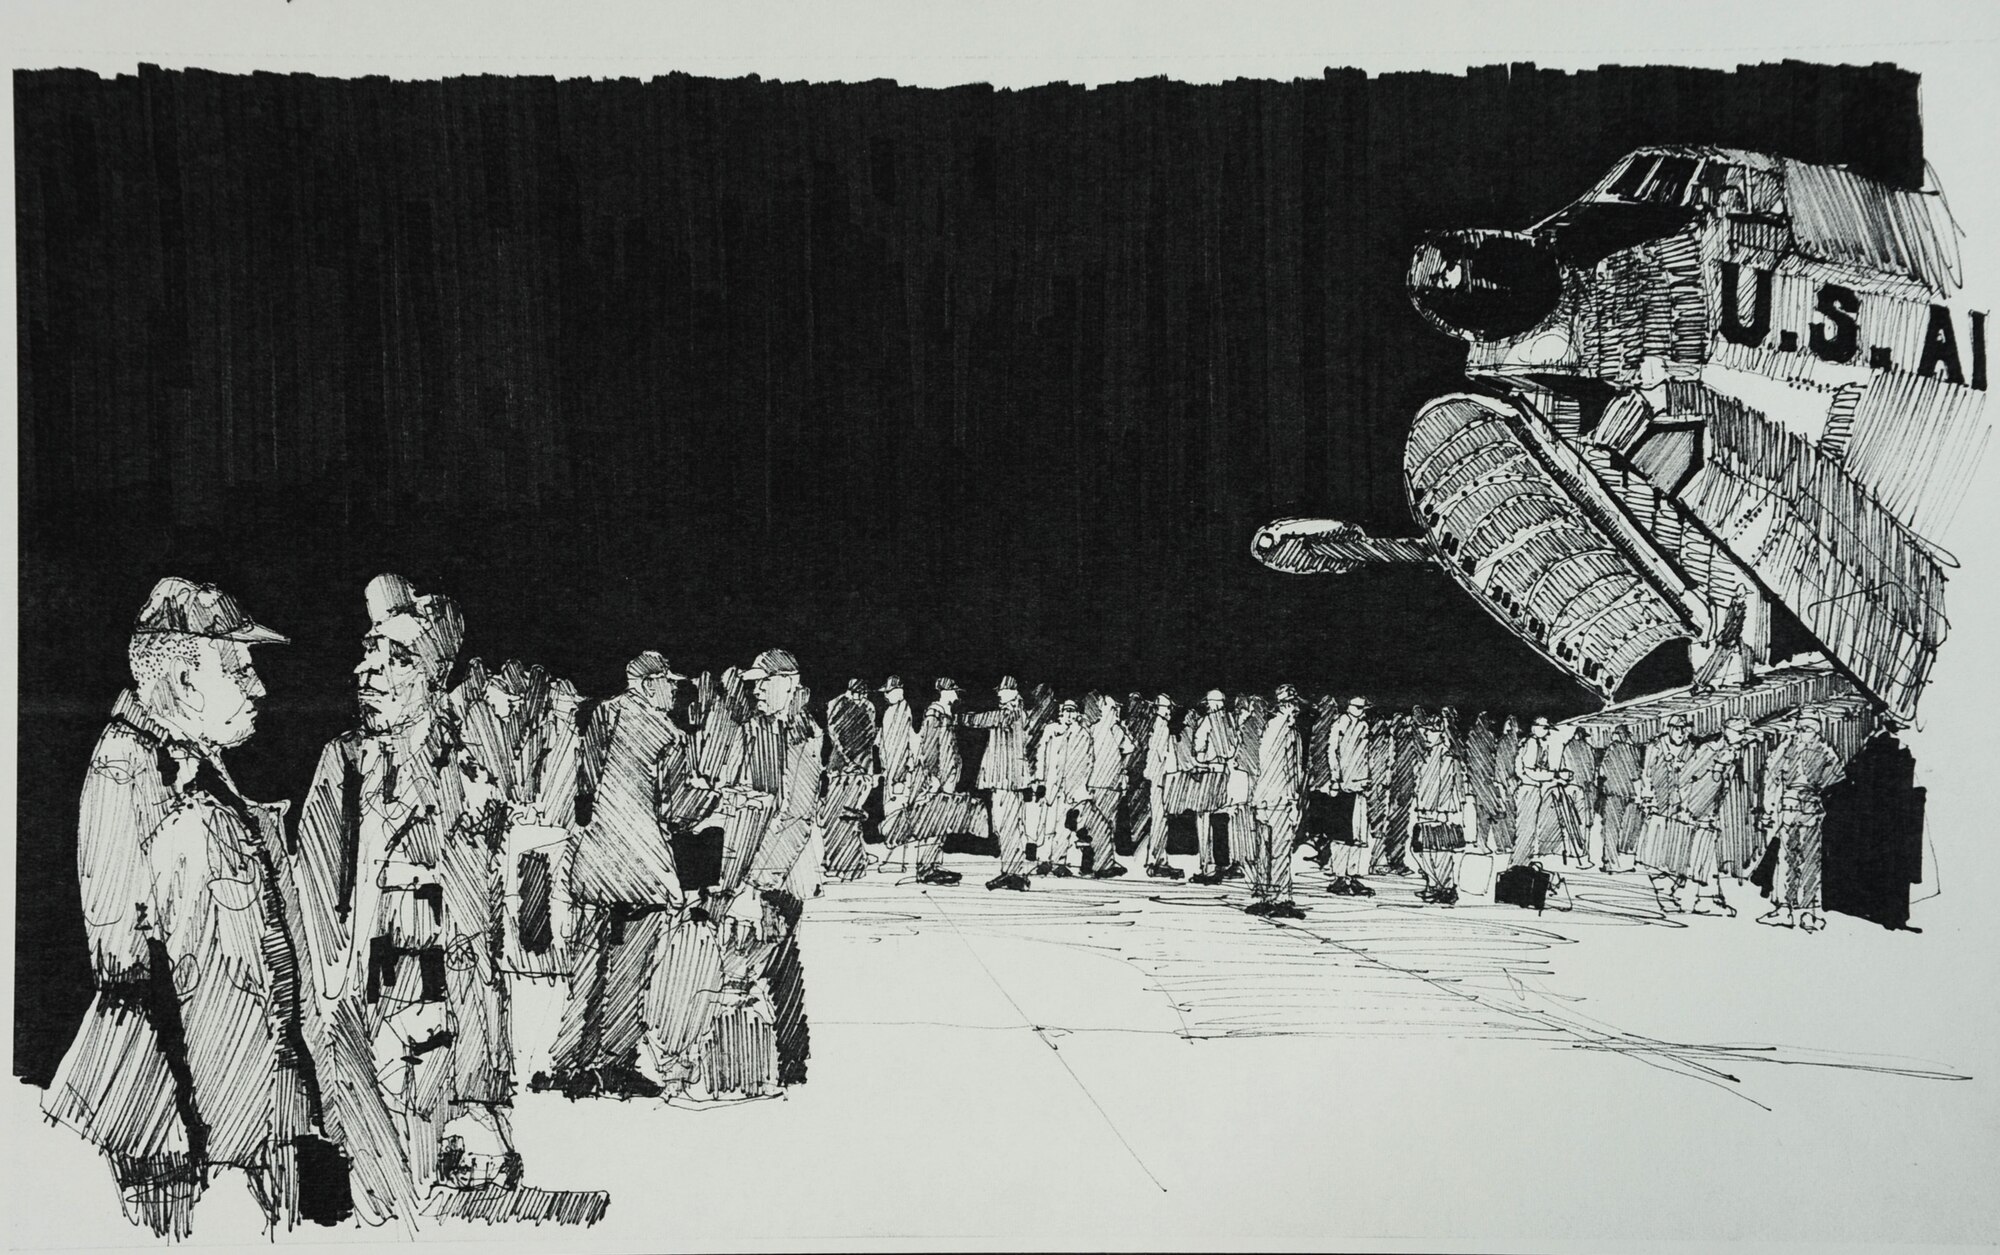 “Preparing to Board.”  This black and white drawing depicts a detail of the August 1969 OreANG deployment to Alaska.  It shows a portion of the 900 members of the 142nd Fighter Group preparing to board one of 10 Oklahoma ANG C-124 transports for a 1,200 air mile, non-stop deployment to Anchorage, Alaska, for 15 days of annual field training. (Drawing by Airman Robert Thomas, 142nd CAM Sq.)